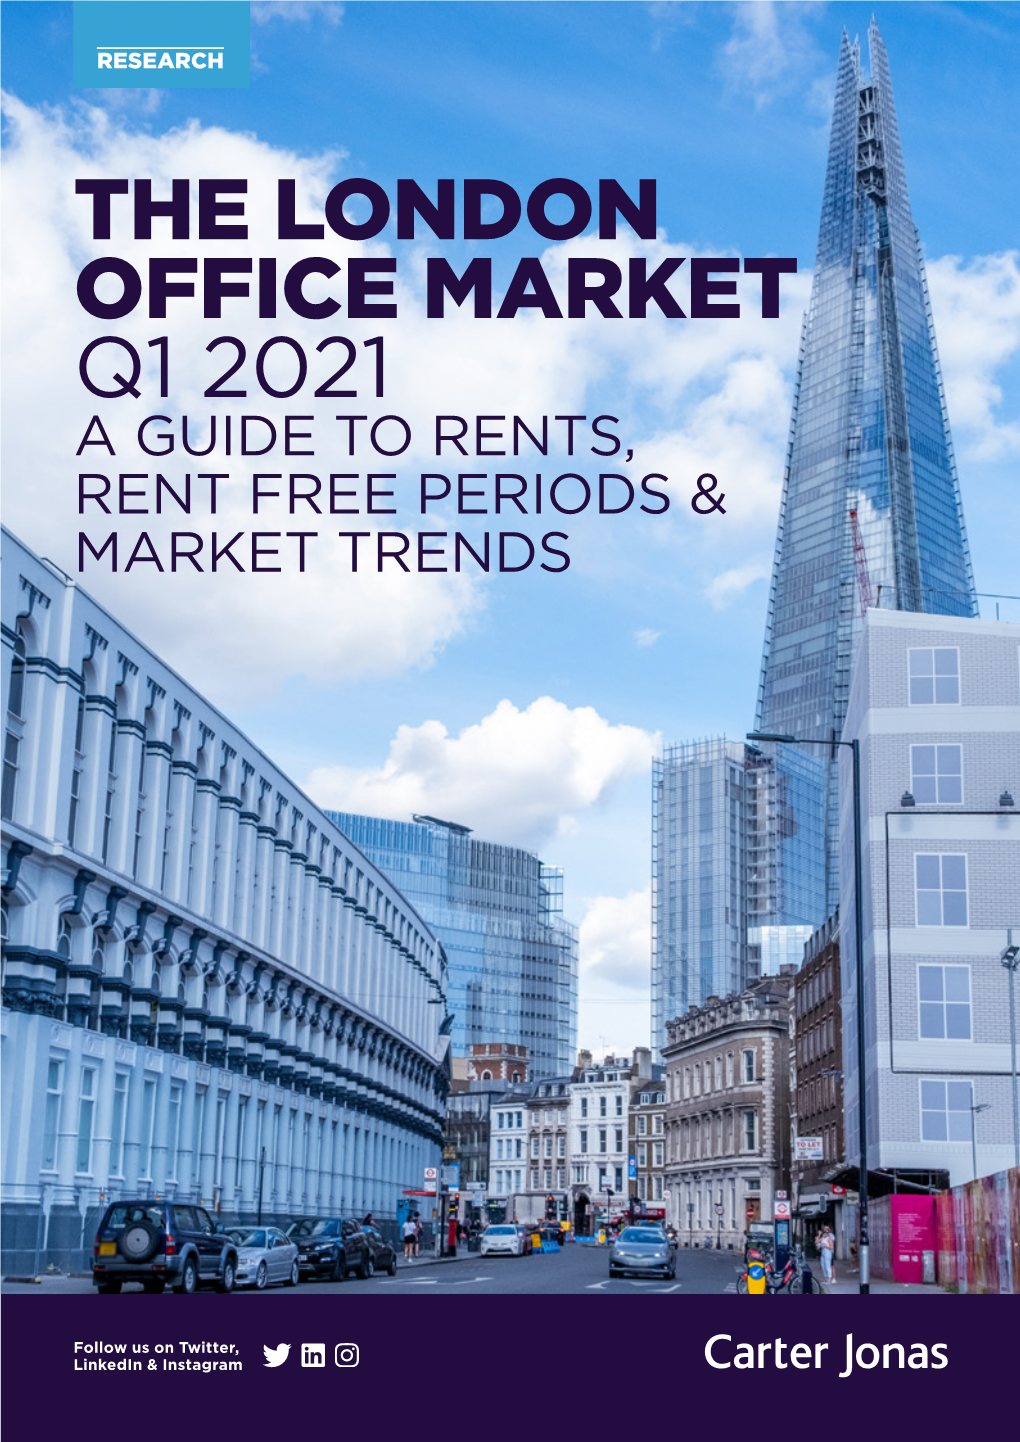 The London Office Market Q1 2021 a Guide to Rents, Rent Free Periods & Market Trends